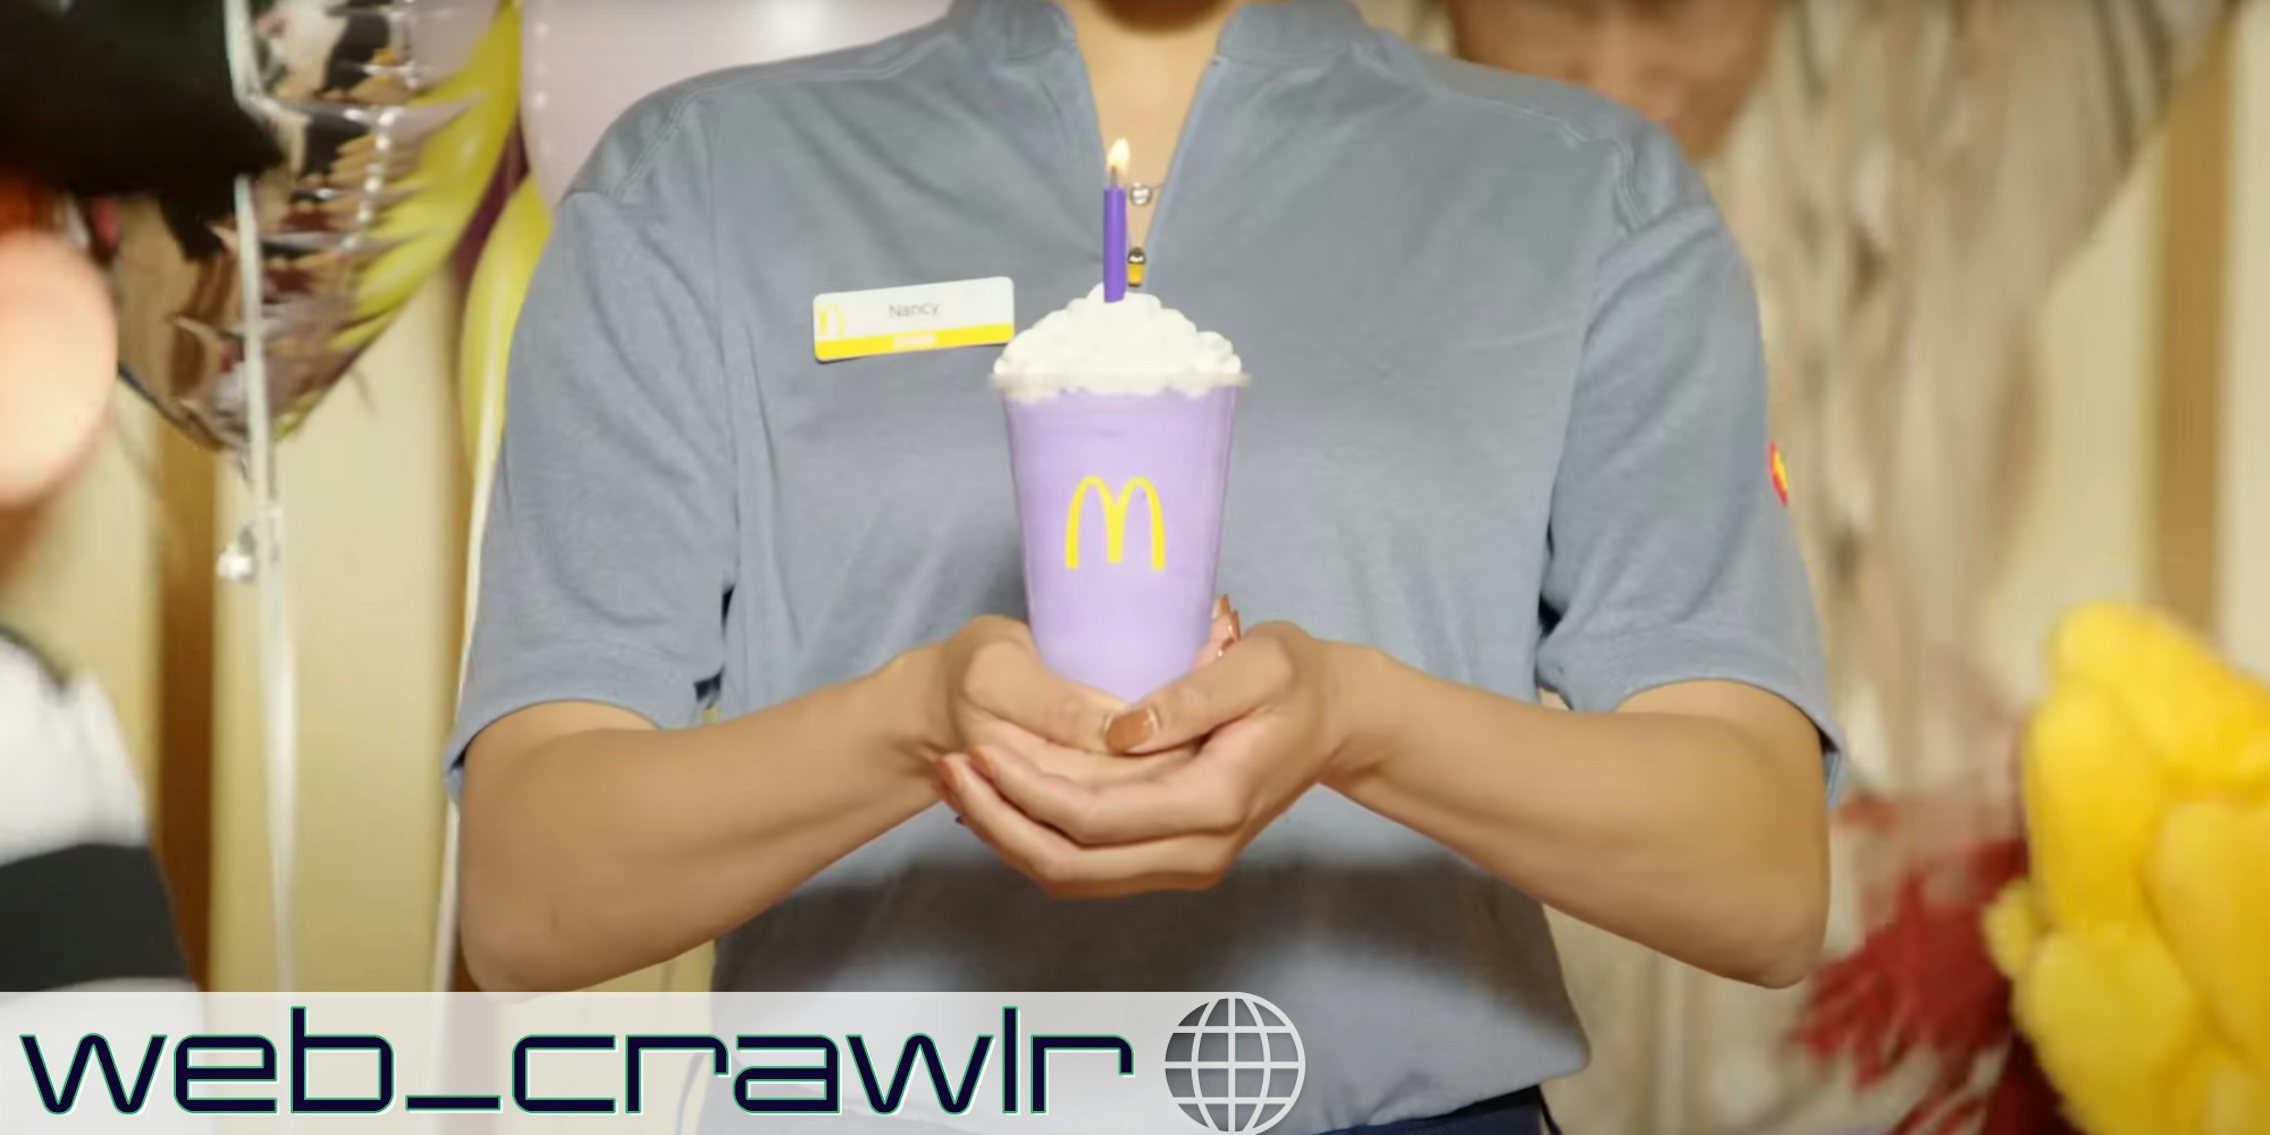 A McDonald's employee holding a Grimace shake. The Daily Dot newsletter web_crawlr logo is in the bottom left corner.